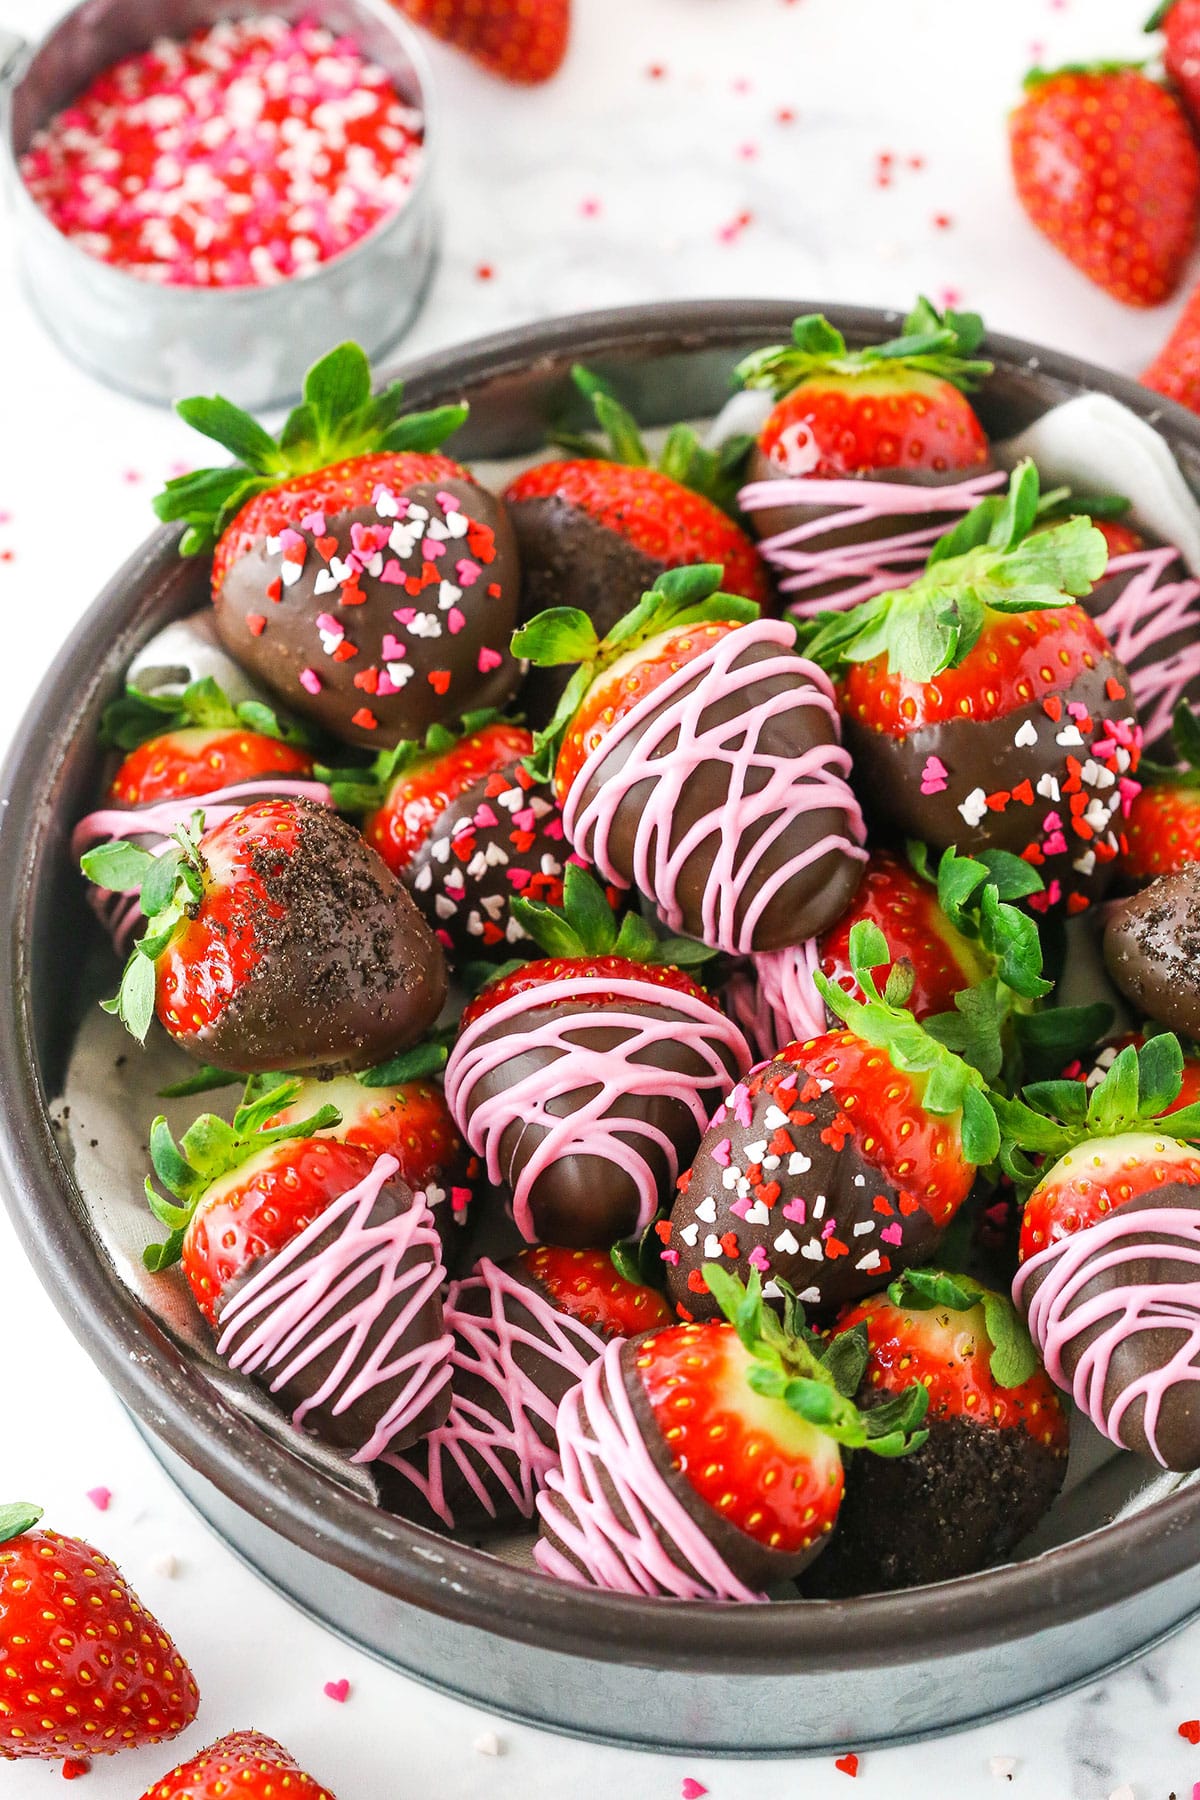 Chocolate Covered Strawberries decorated with pink frosting or red, white and pink sprinkles stacked in a glass bowl on a white table top